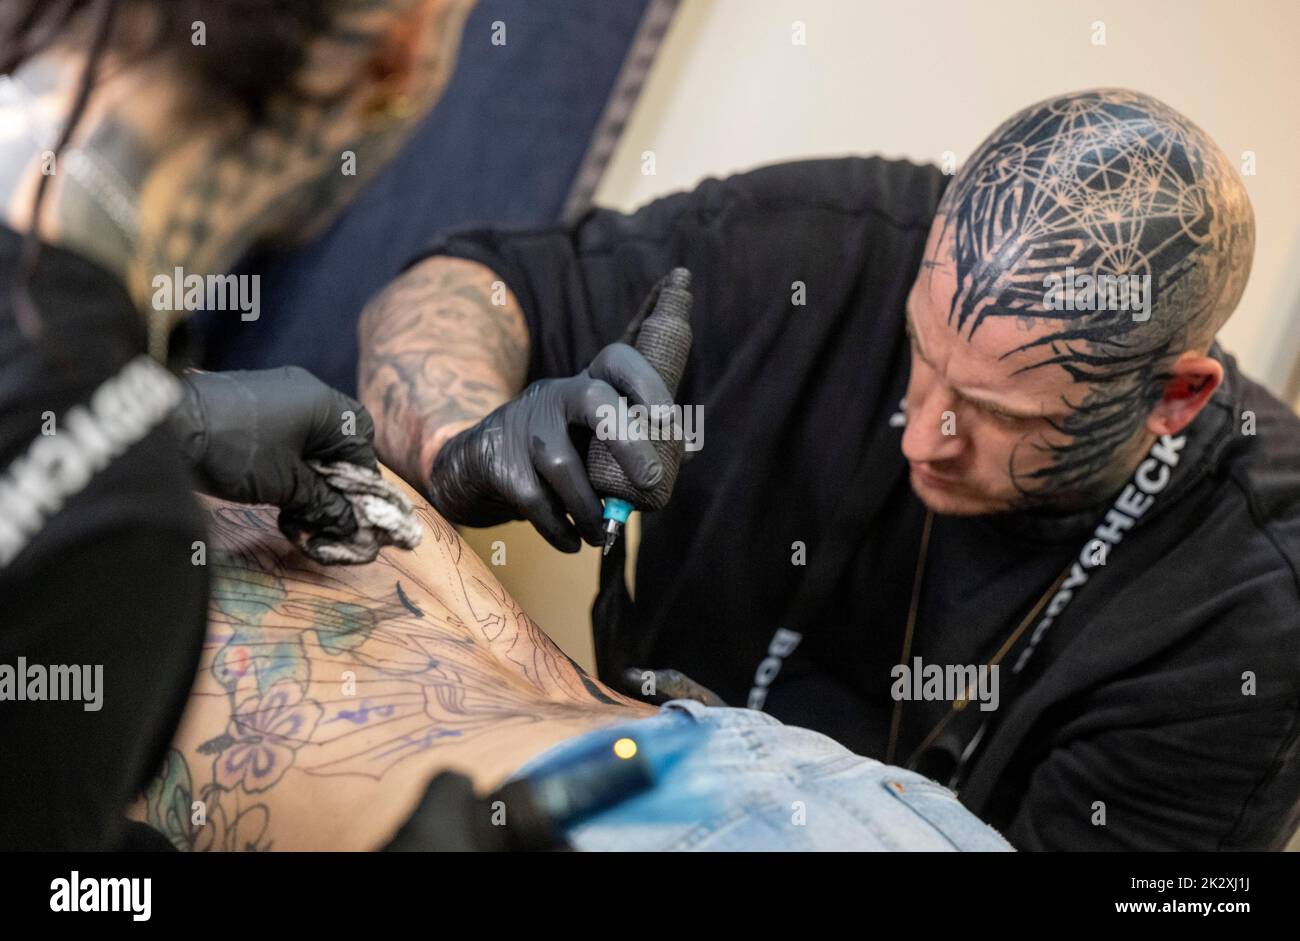 Frontiers | The Effects of VR Use on Pain Experienced During a Tattoo  Procedure: A Pilot Study